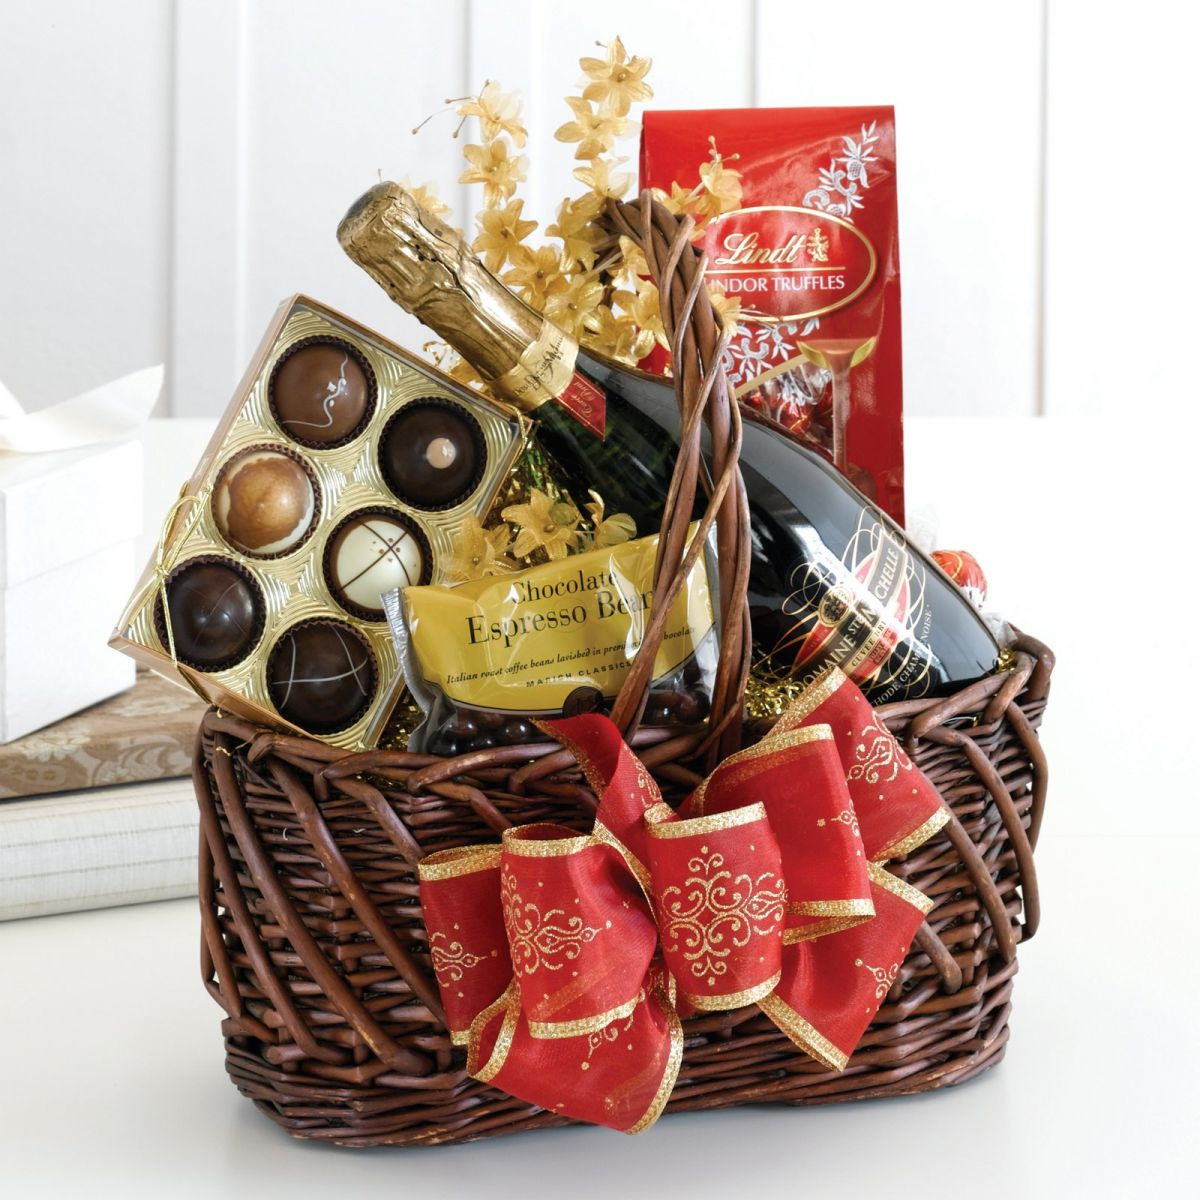 Chocolate Gift Baskets Ideas
 Collectibles And Gifts Chocolate Gift Basket Ideas